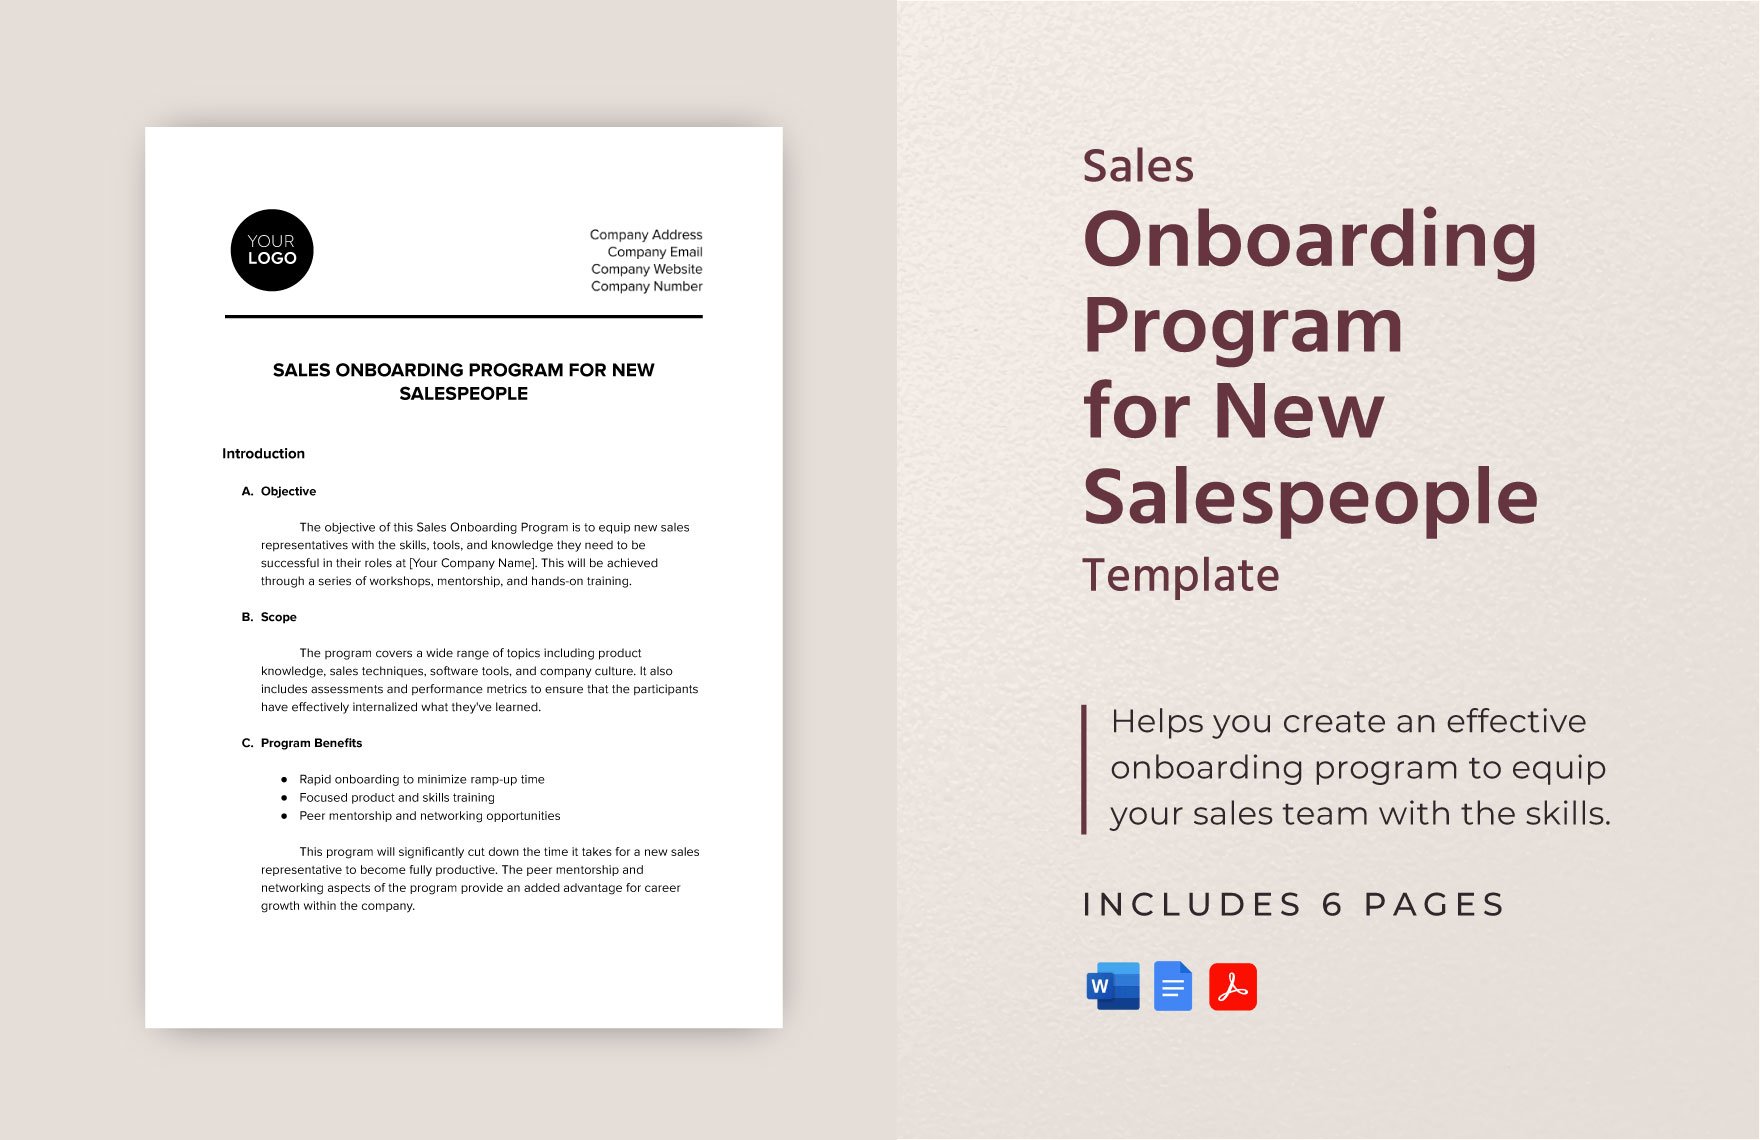 Sales Onboarding Program for New Salespeople Template in Word, Google Docs, PDF